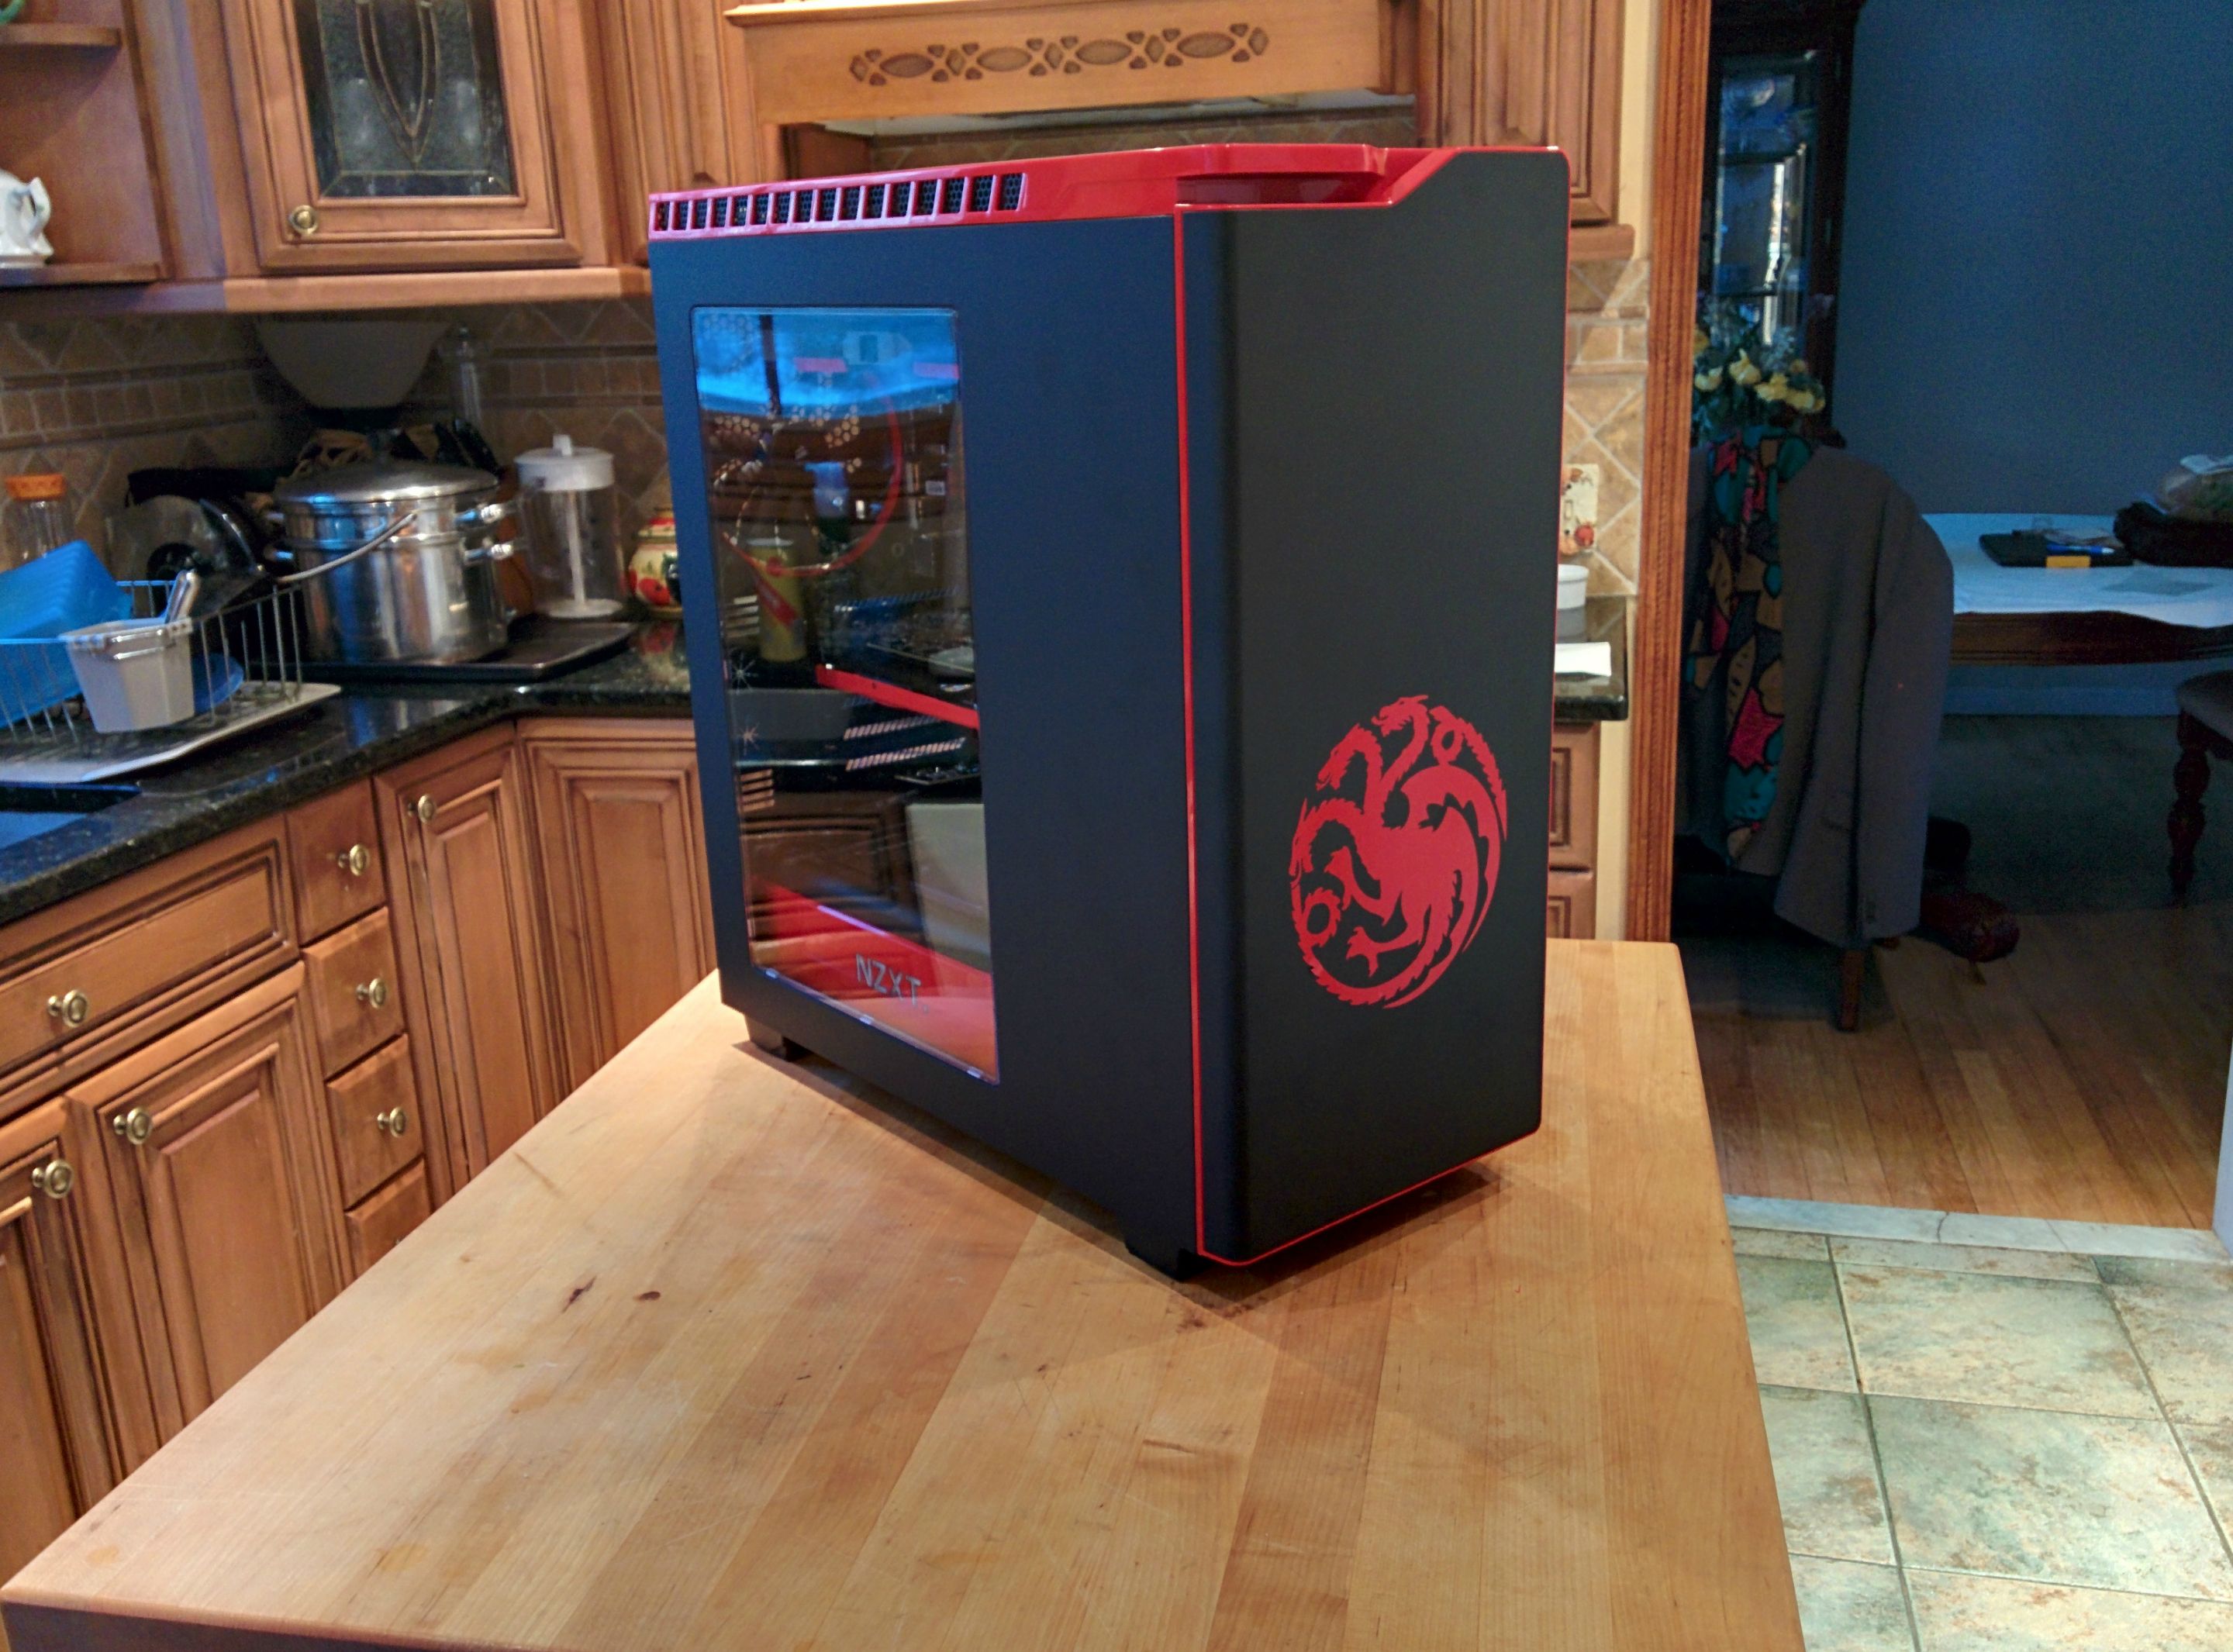 PC Case Build inspired by Game of Thrones!